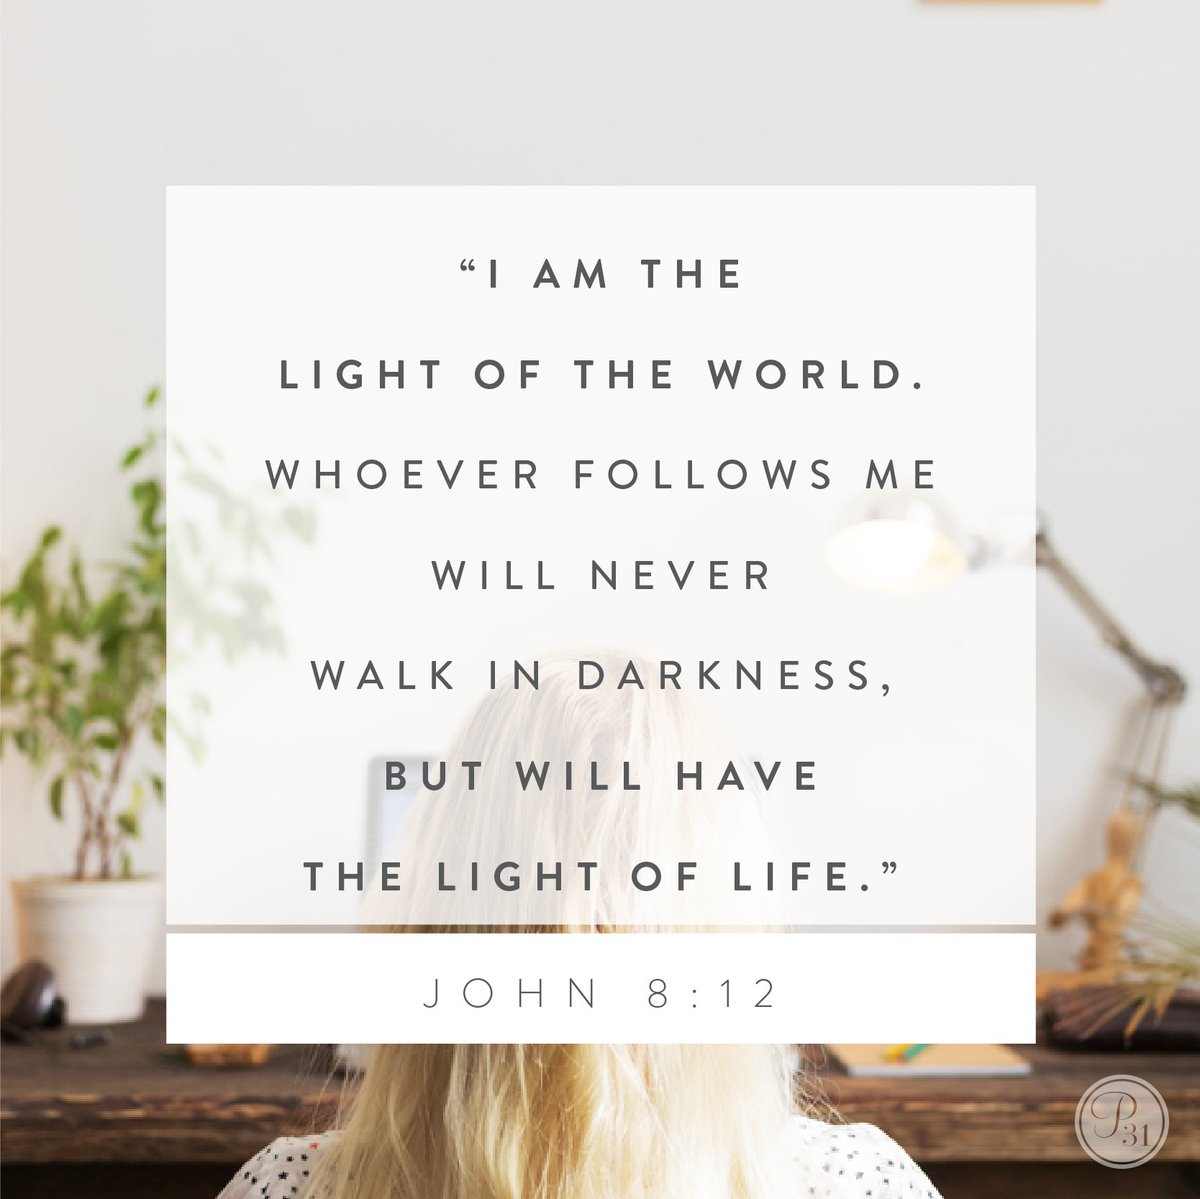 Jesus is the Light. The world has no other light than Him. It is Jesus or darkness; there is no third alternative.